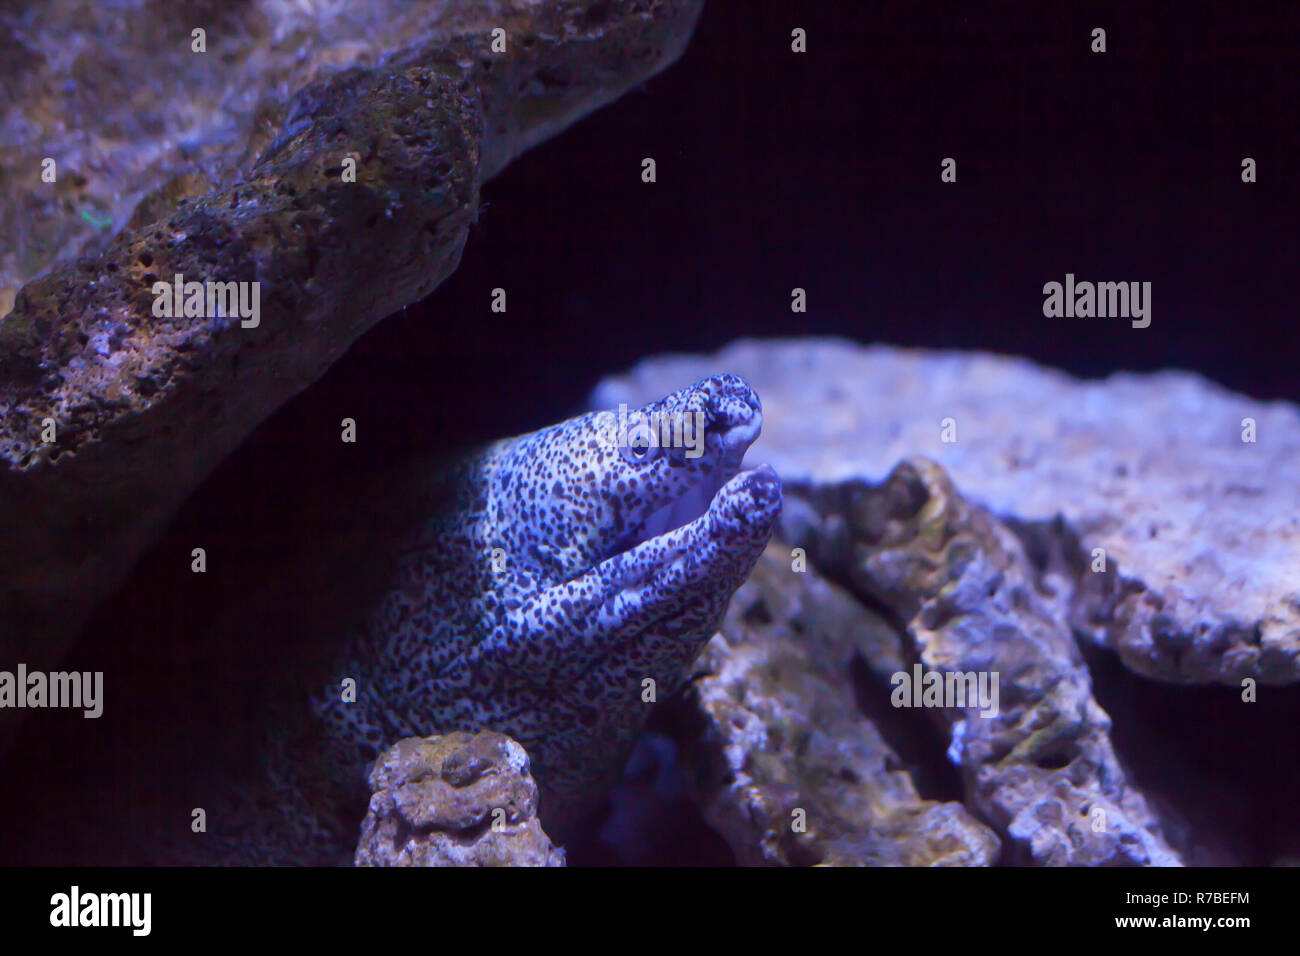 Spotted moray eel Foto Stock